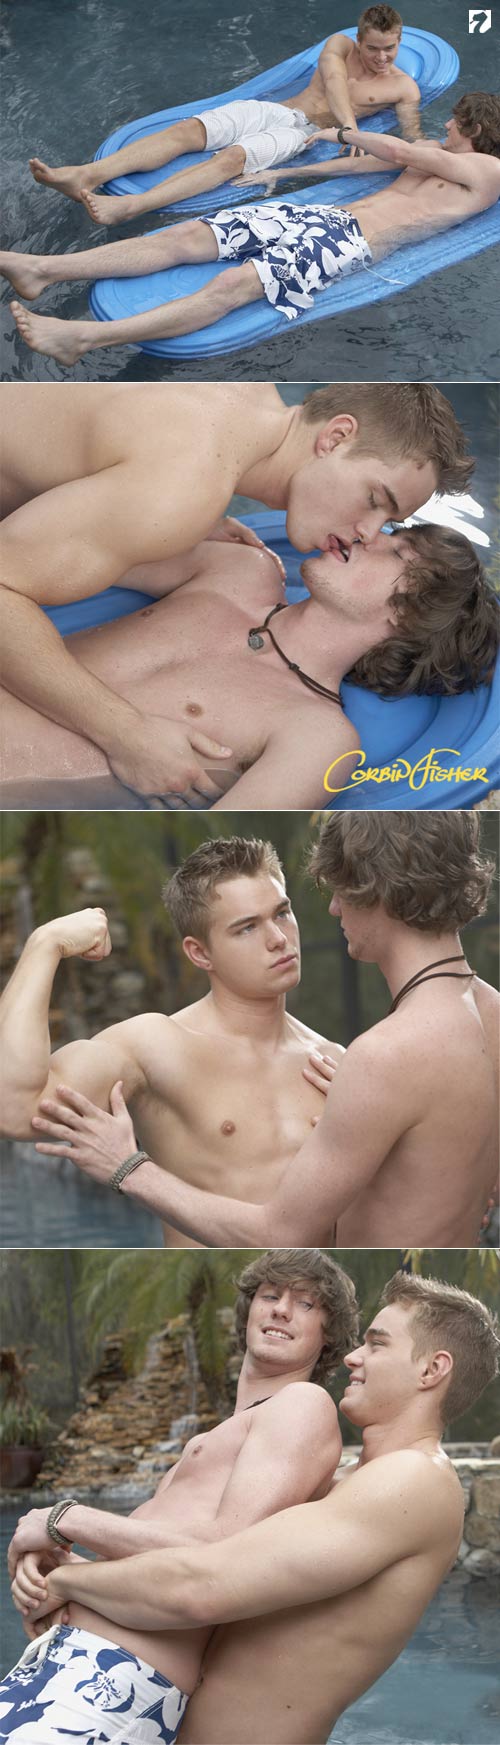 Jared & Connor's Tag Team at AmateurCollegeSex